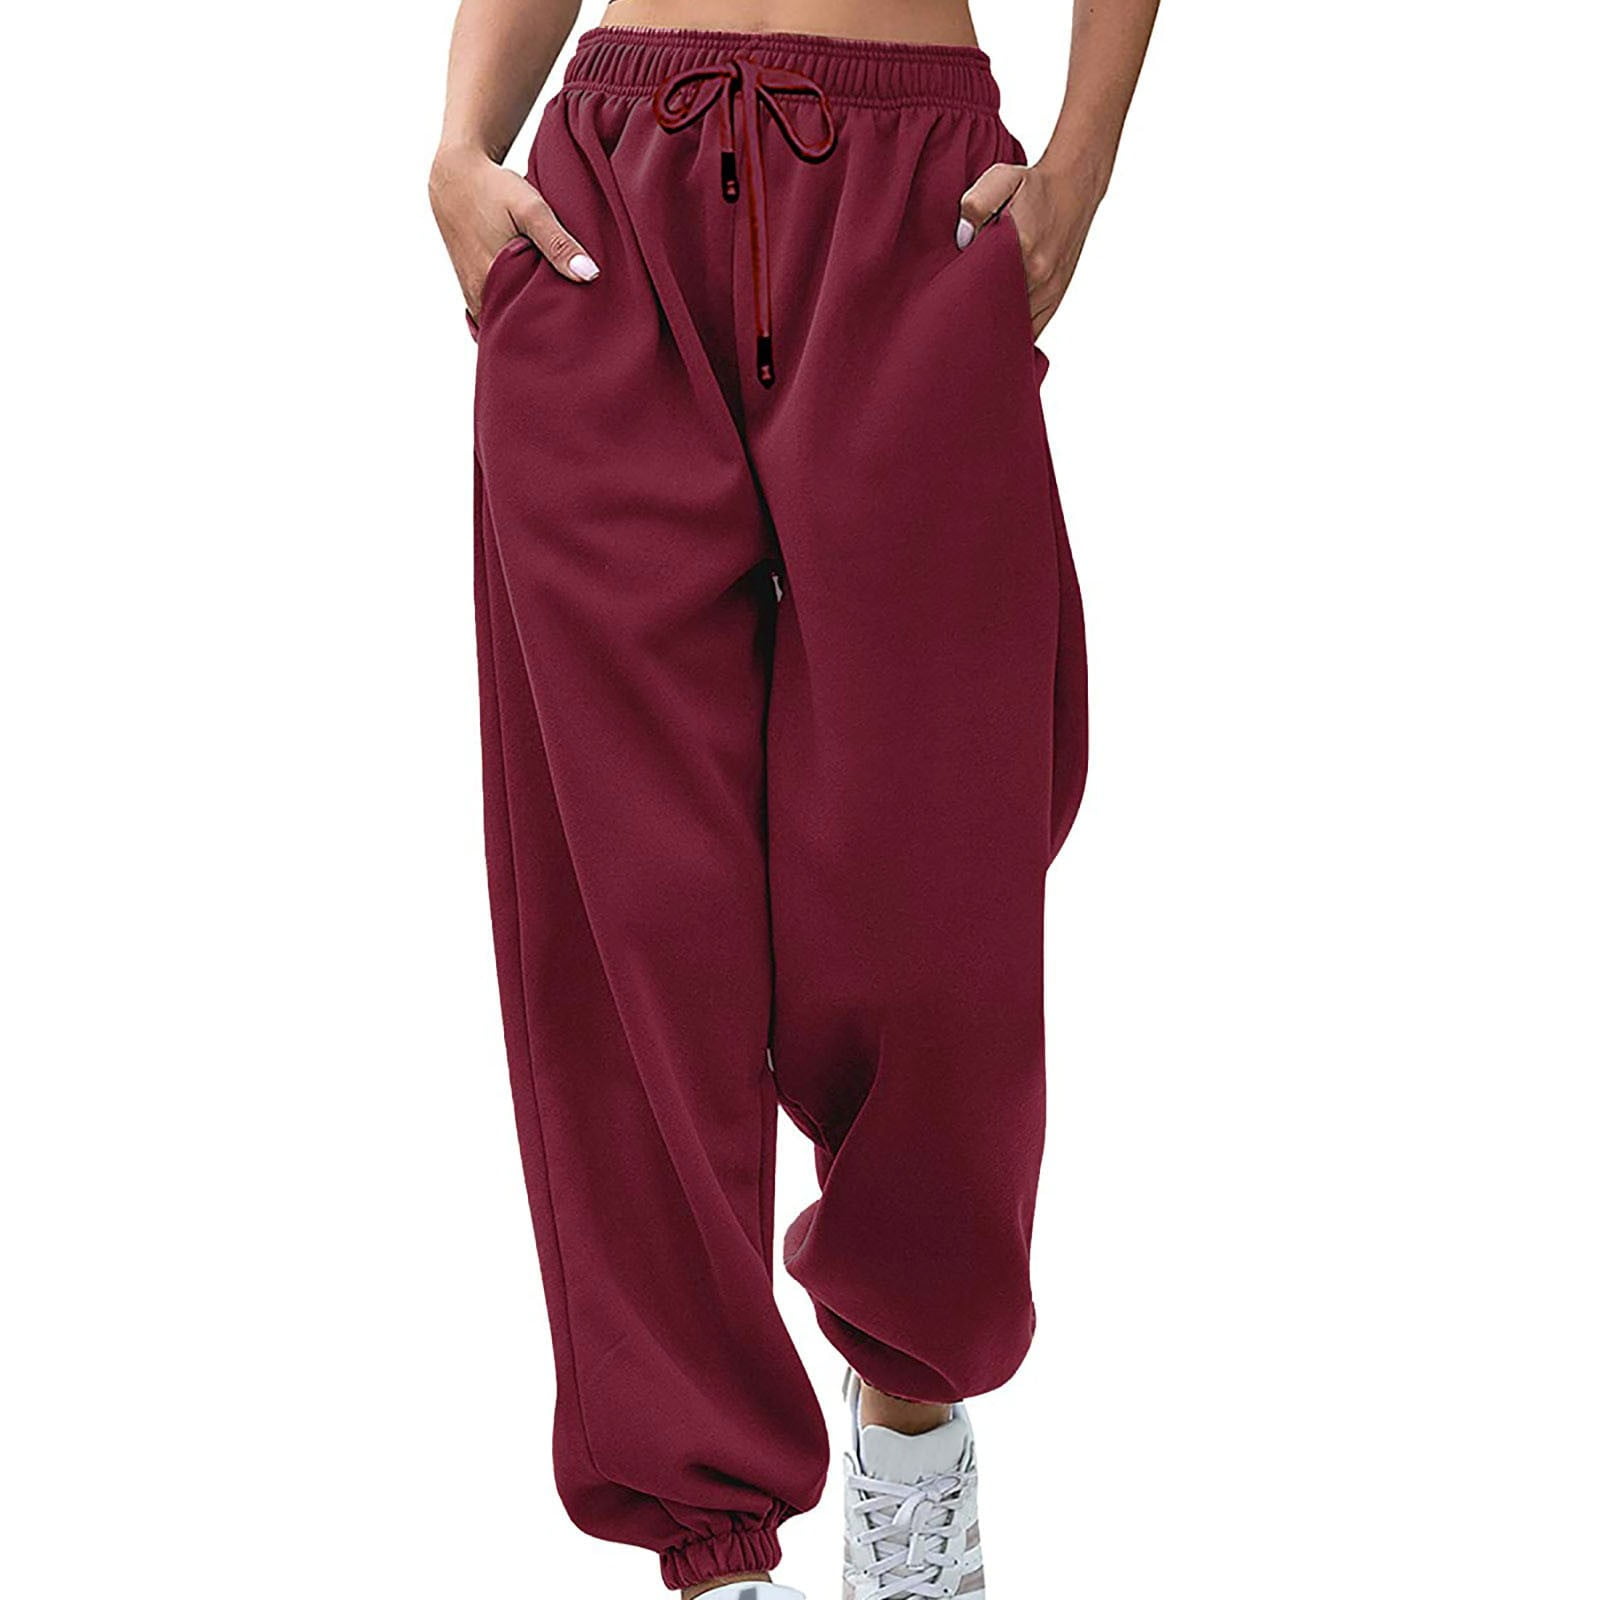 YWDJ Joggers for Women Plus Size Women Fashion Casual Solid Elastic Waist  Trousers Long Straight Pants Pink M 